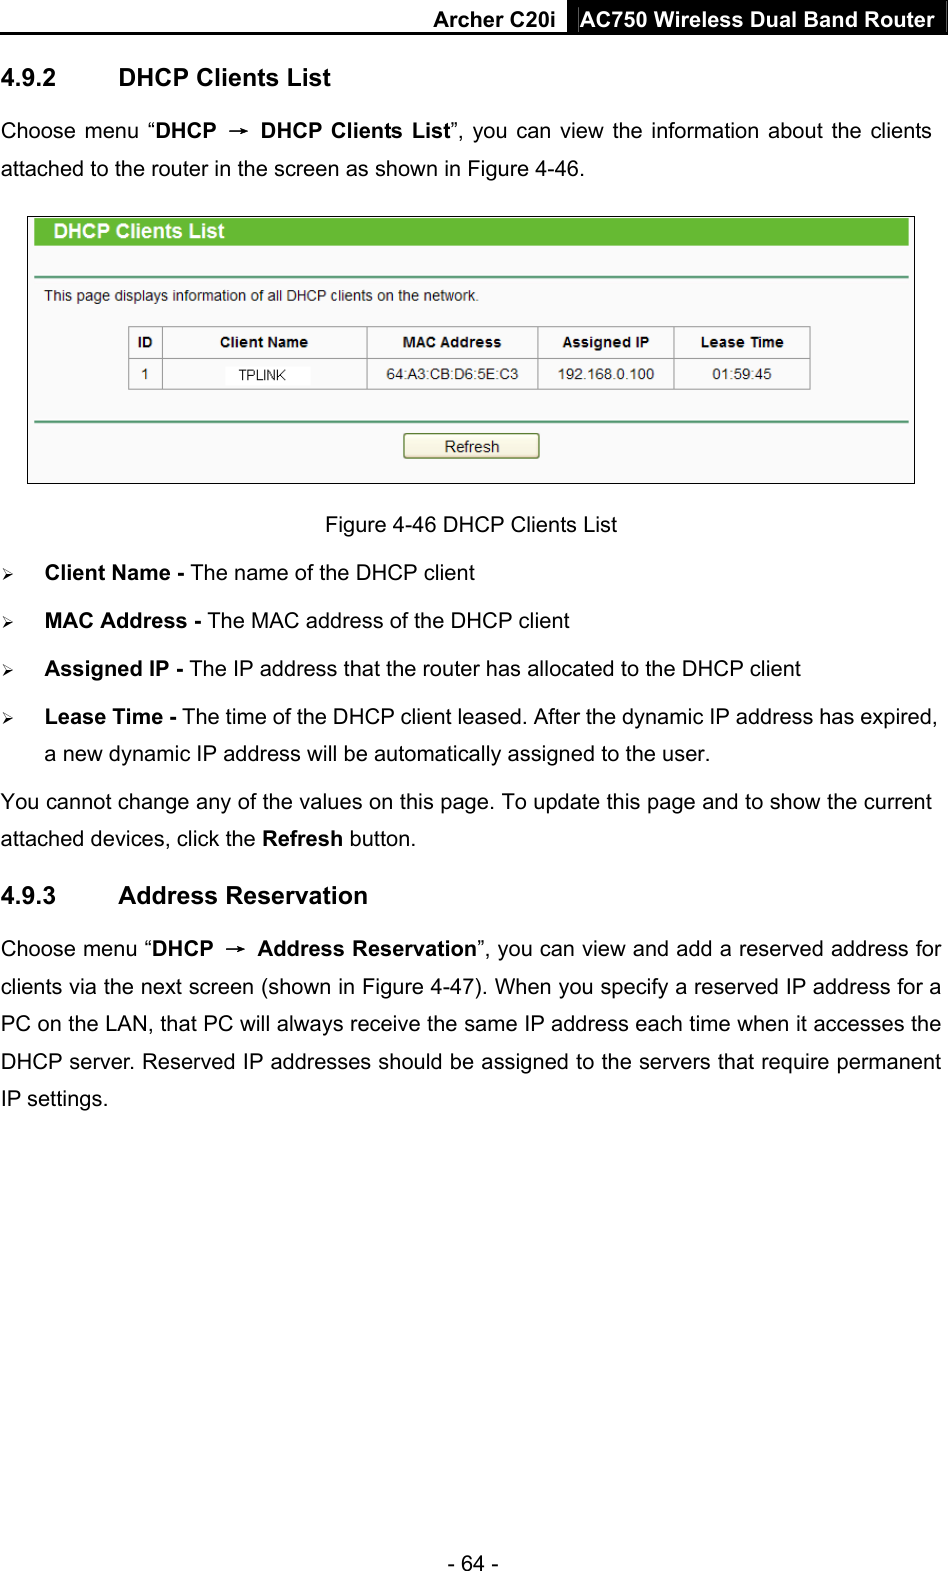 Archer C20i AC750 Wireless Dual Band Router - 64 - 4.9.2  DHCP Clients List Choose menu “DHCP  → DHCP Clients List”, you can view the information about the clients attached to the router in the screen as shown in Figure 4-46.  Figure 4-46 DHCP Clients List ¾ Client Name - The name of the DHCP client   ¾ MAC Address - The MAC address of the DHCP client   ¾ Assigned IP - The IP address that the router has allocated to the DHCP client ¾ Lease Time - The time of the DHCP client leased. After the dynamic IP address has expired, a new dynamic IP address will be automatically assigned to the user.     You cannot change any of the values on this page. To update this page and to show the current attached devices, click the Refresh button. 4.9.3  Address Reservation Choose menu “DHCP  → Address Reservation”, you can view and add a reserved address for clients via the next screen (shown in Figure 4-47). When you specify a reserved IP address for a PC on the LAN, that PC will always receive the same IP address each time when it accesses the DHCP server. Reserved IP addresses should be assigned to the servers that require permanent IP settings.   